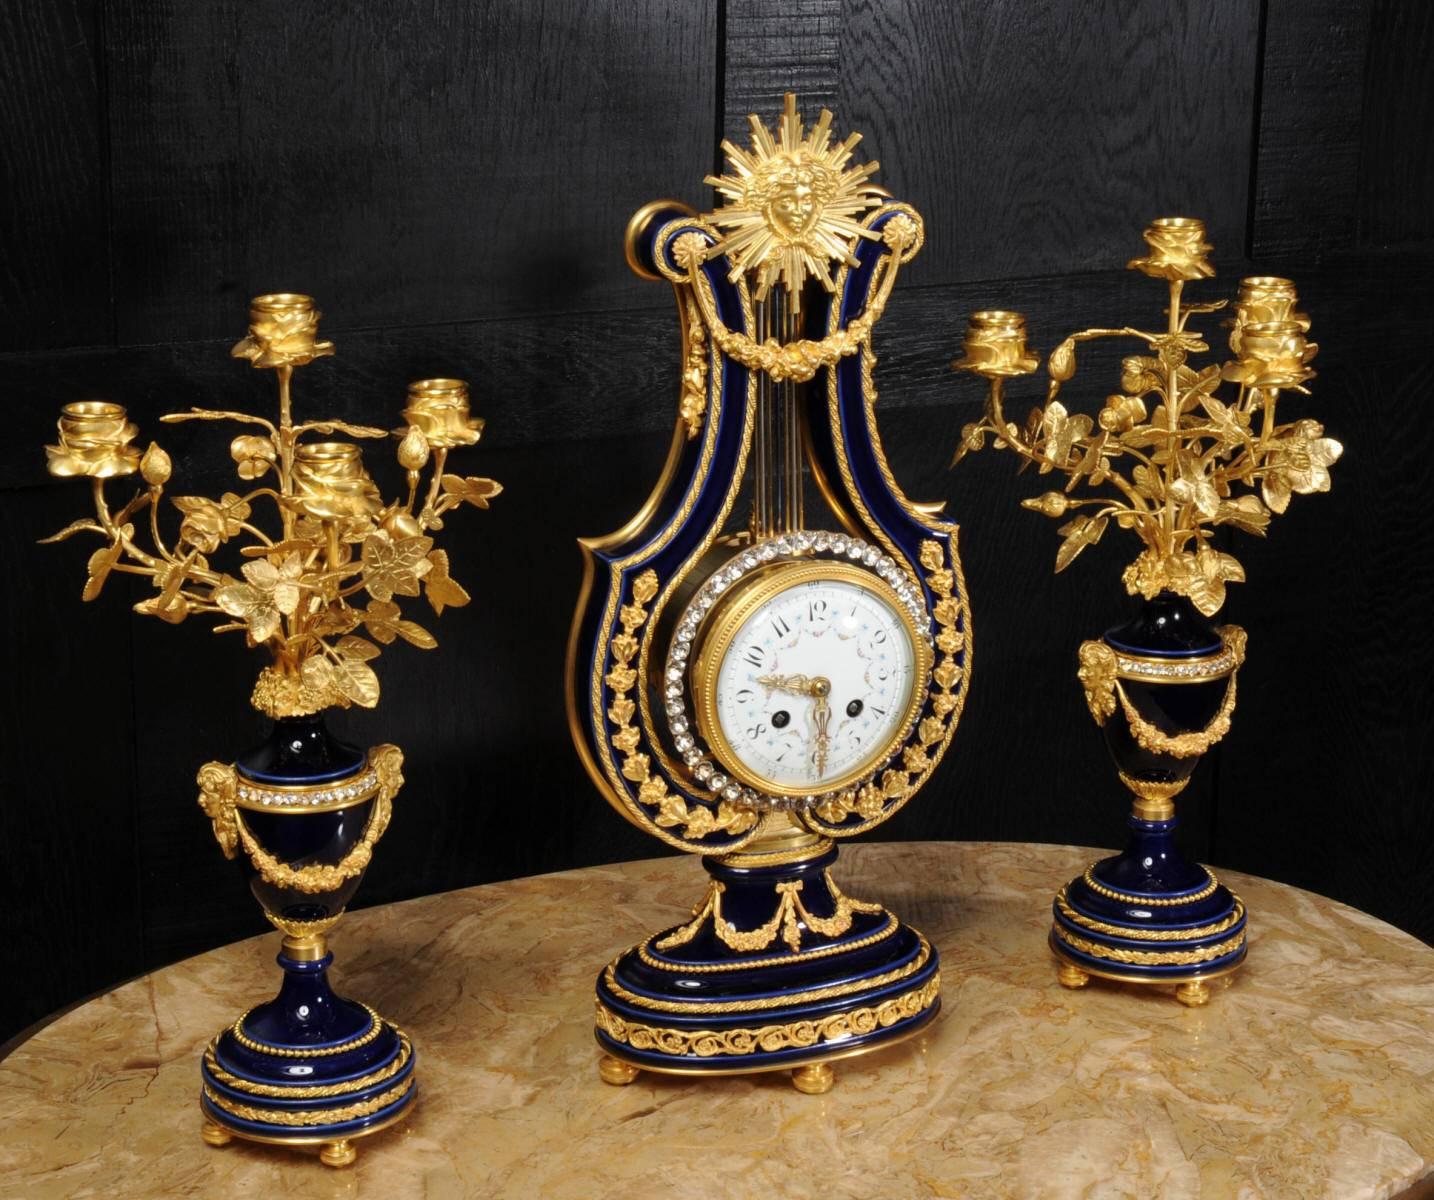 Antique French clockset, one of the nicest Louis XVI designs, elegant lyre shape in cobalt blue Sevres style porcelain mounted with exquisite ormolu (finely gilded bronze doré).
A paste jewel set bezel surrounding the clock forms the mystery